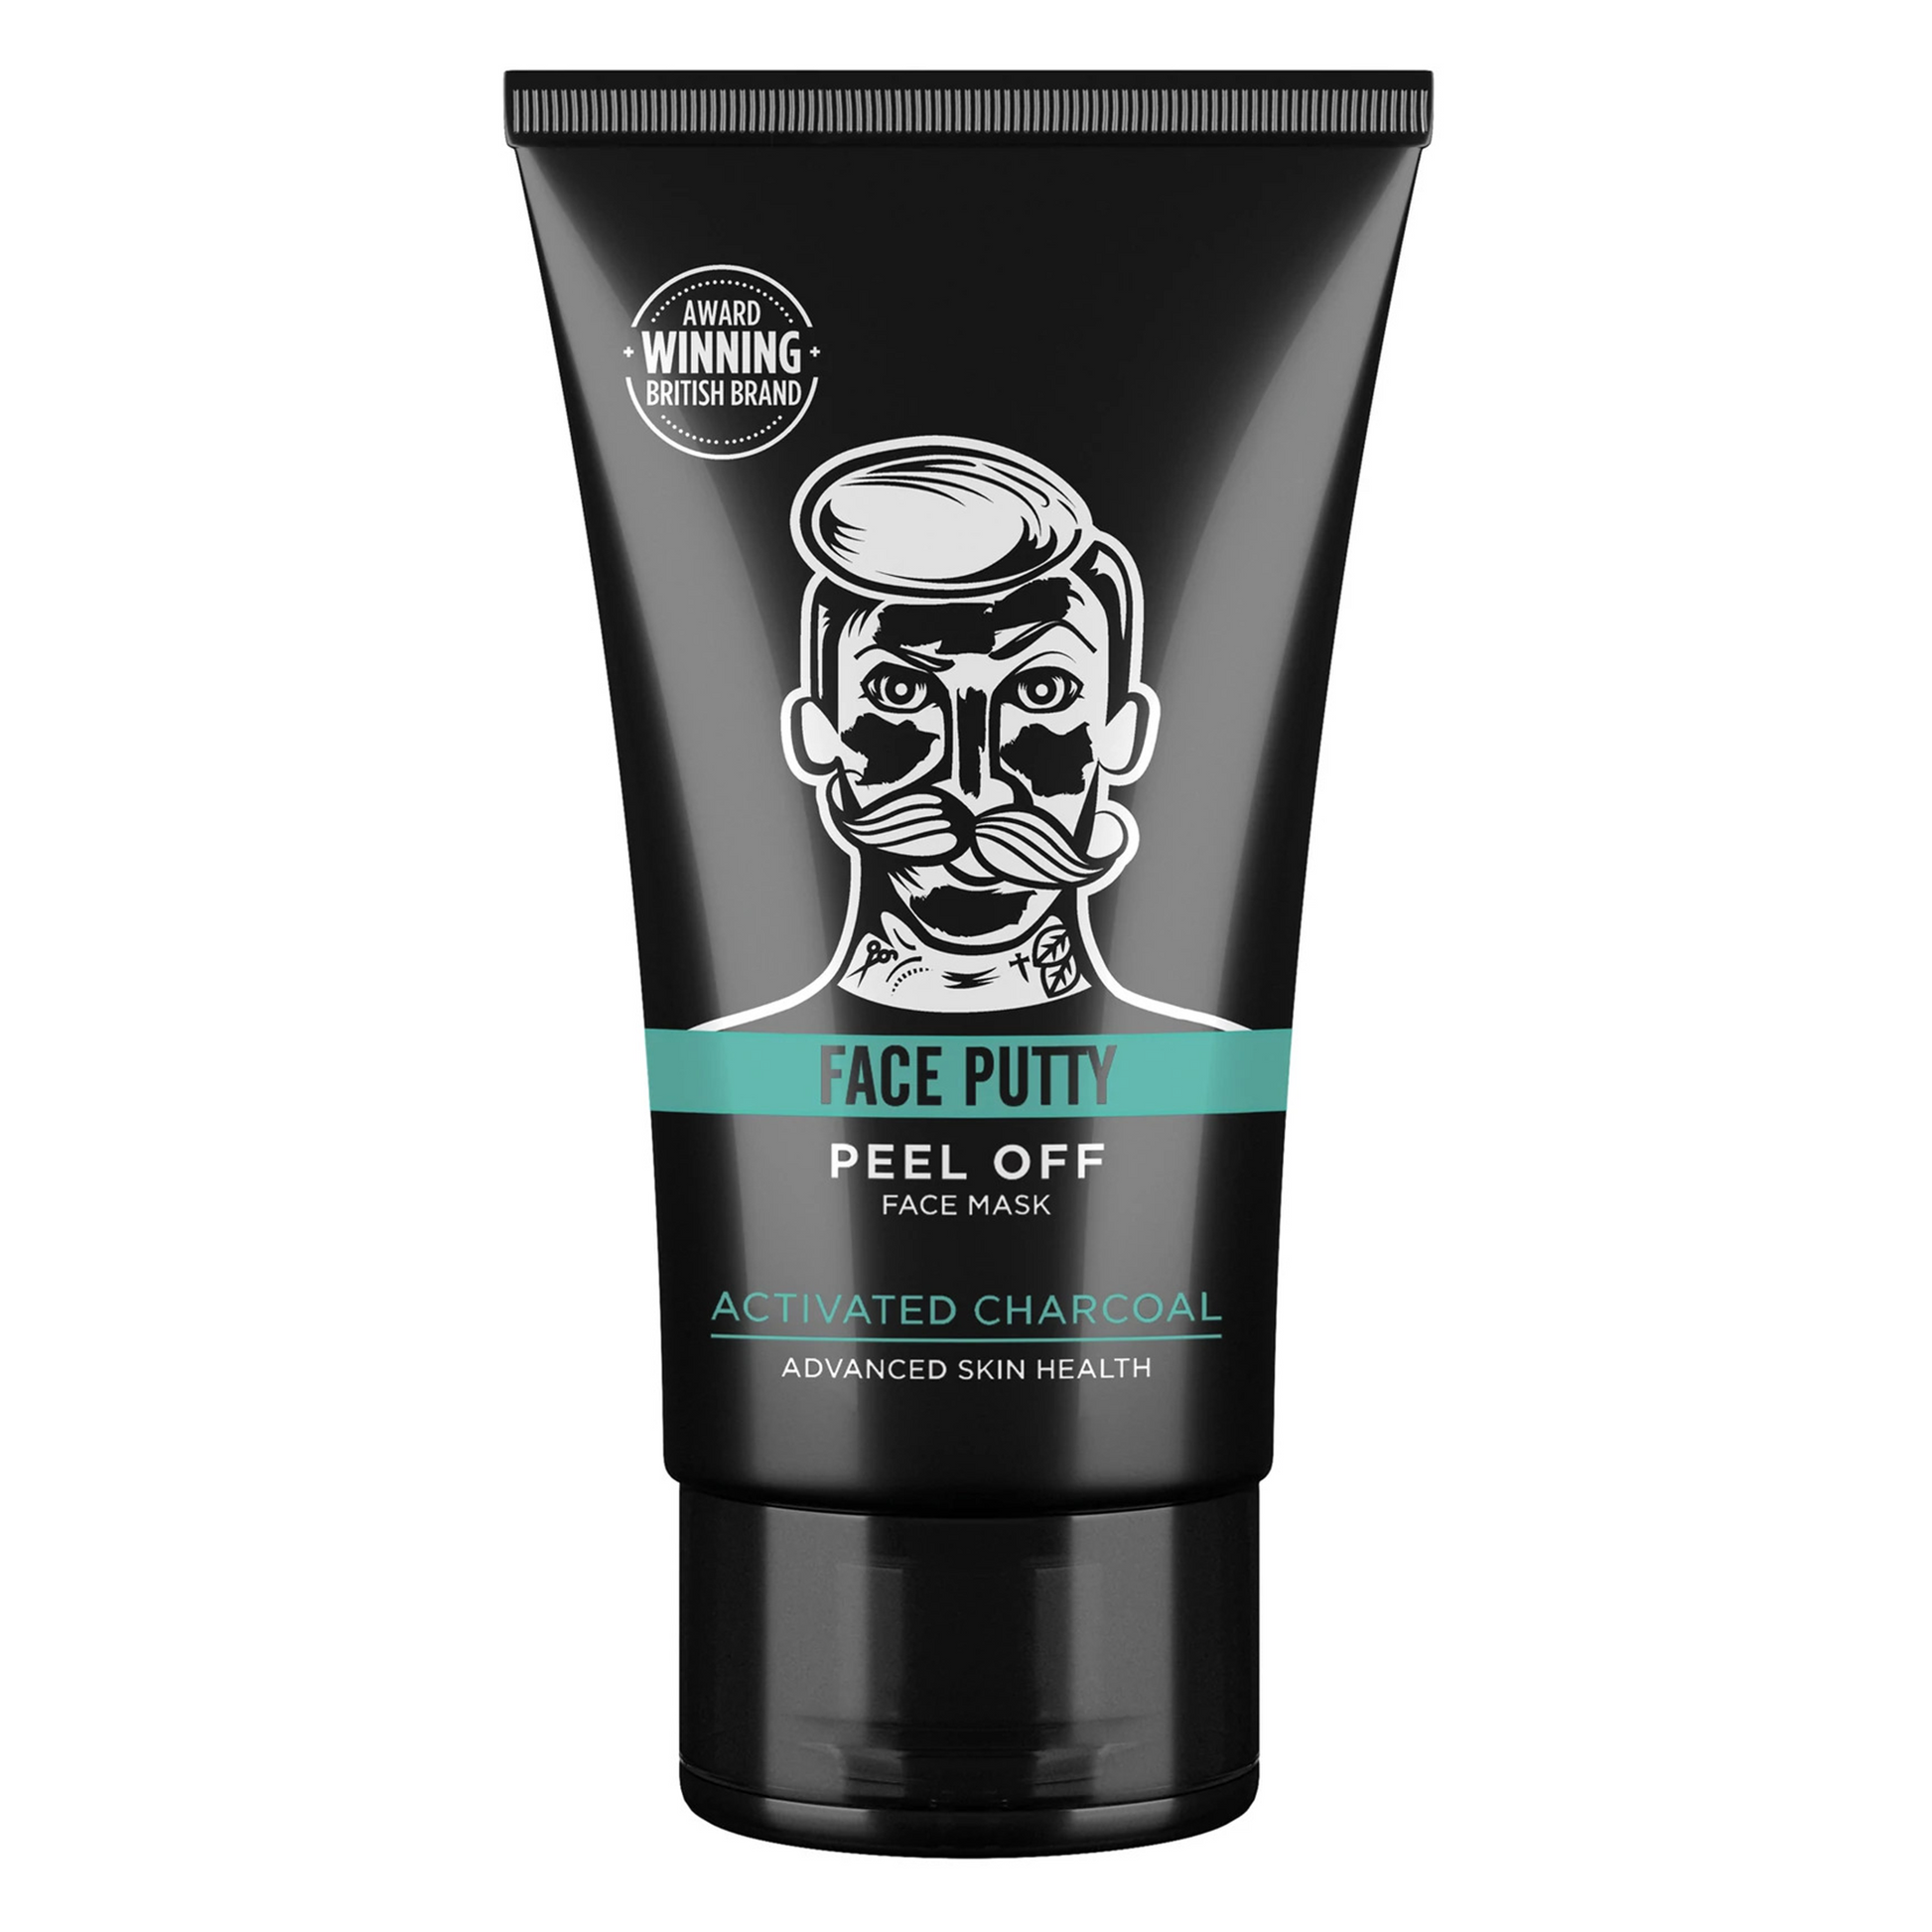 Barber Pro Face Putty Peel-Off Face Mask: The BARBER PRO Face Putty Peel-Off Mask is the all in one answer for cleansed, healthy skin. Working to detoxify, replenish and rebalance, this mask is the ultimate choice for enhancing your skin health.  The BARBER PRO Face Putty Peel-Off Mask targets blackheads and acne, cleansing deep into the pores and detoxifying the skin. This process clears impurities, leaving the area feeling thoroughly restored.